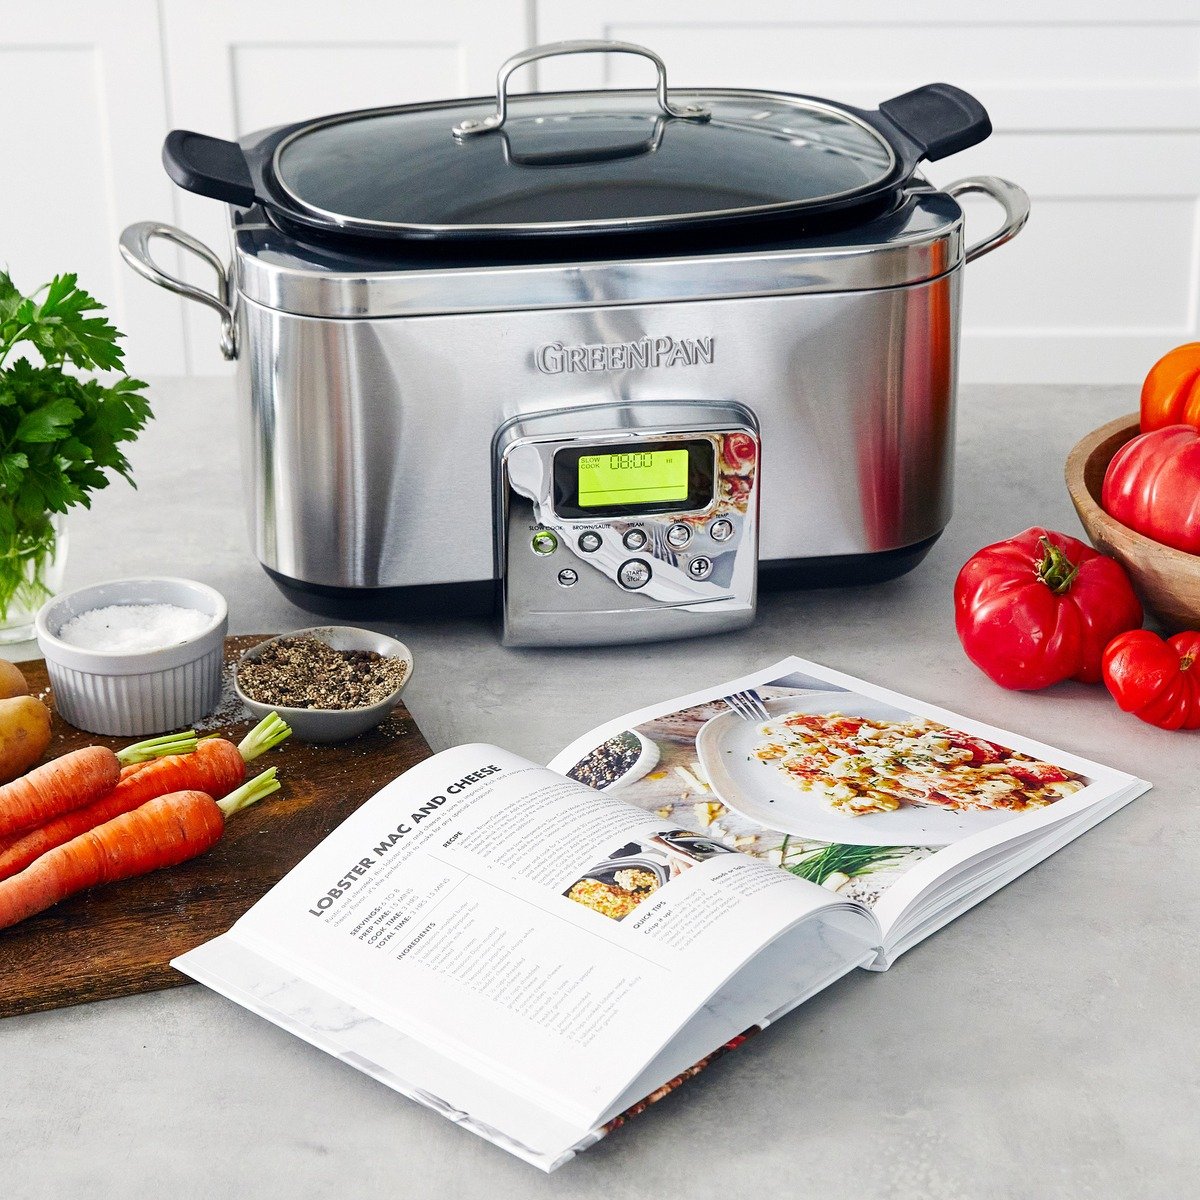  - Shop by Category - Slow Cookers